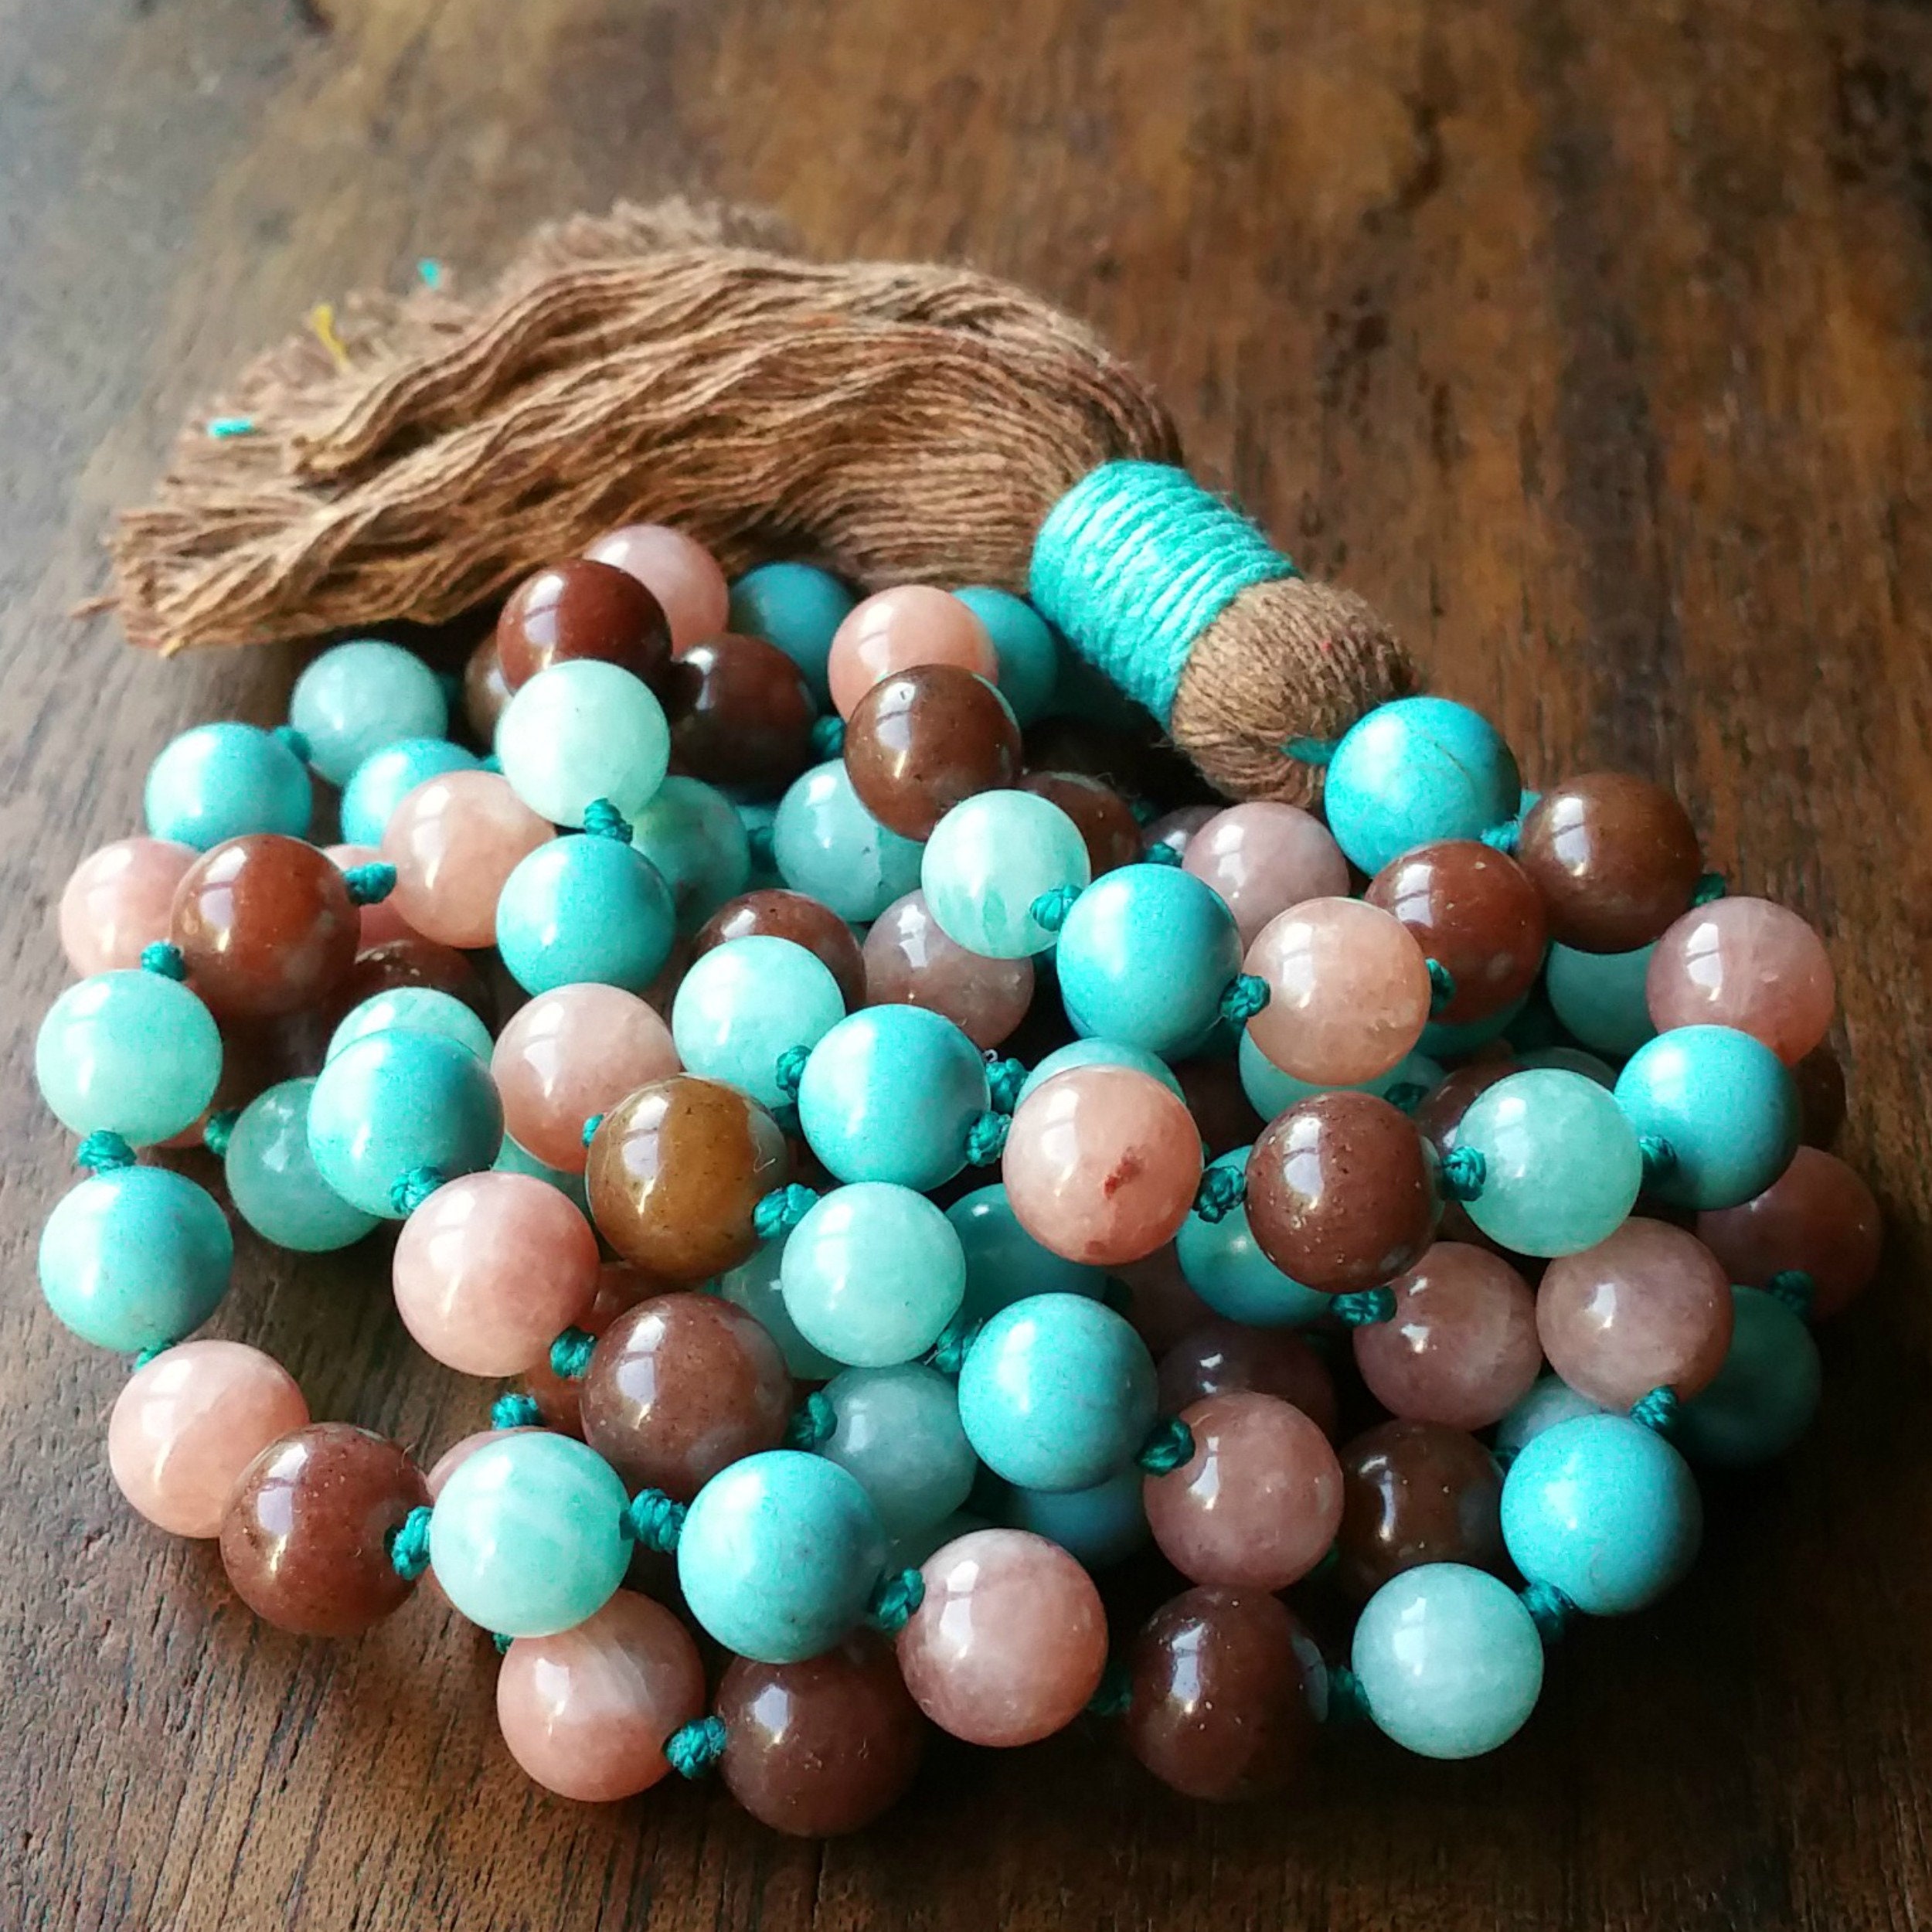 8MM 108 Amazonite Gemstone Beads mala Knot Chakras Necklace Gift Colorful spread